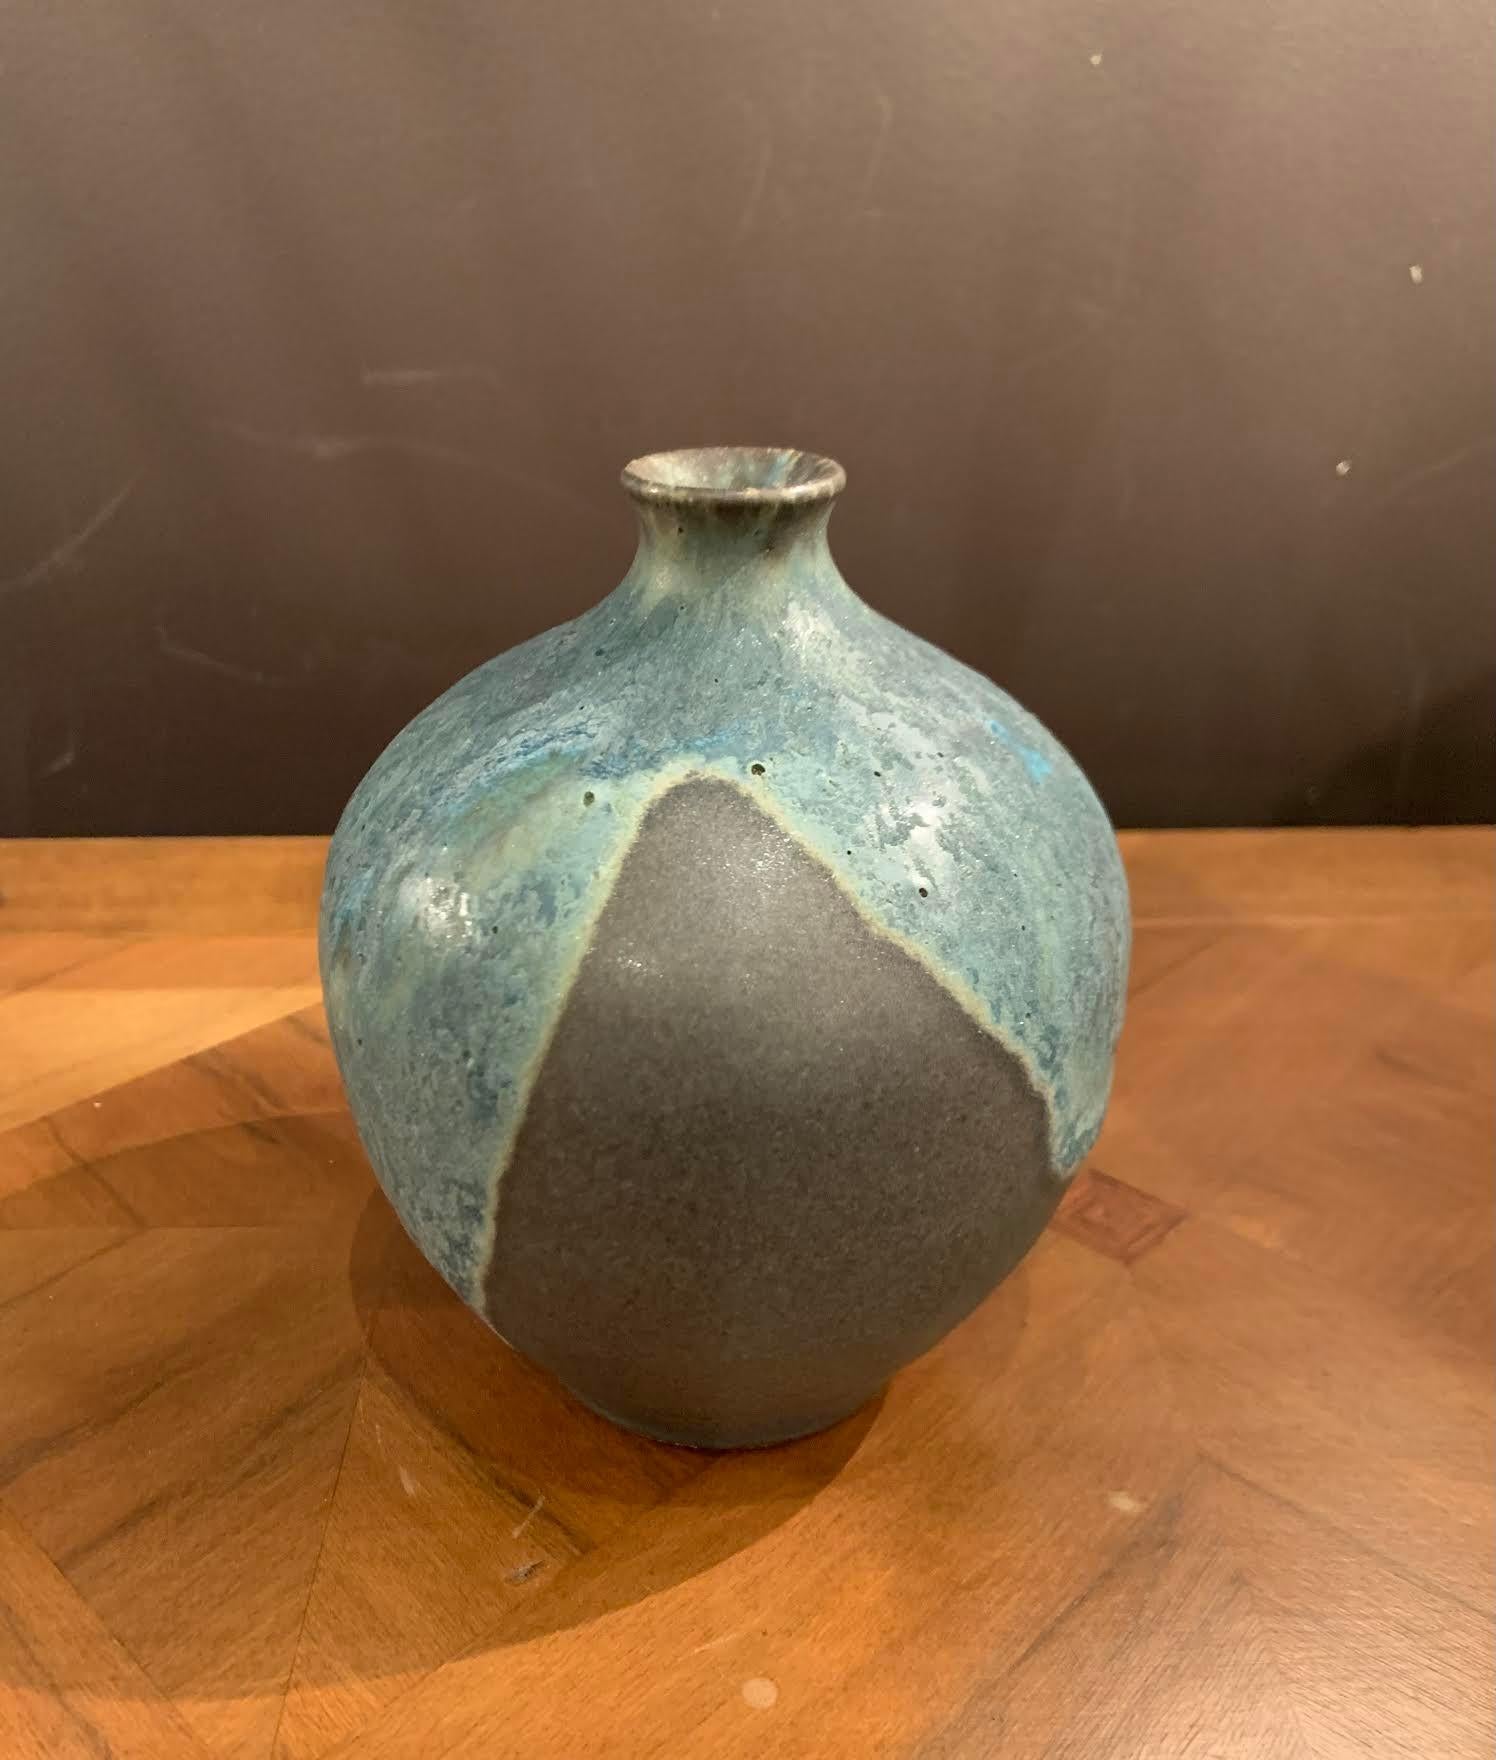 Contemporary American Ceramist Peter Speliolpoulos stoneware vase.
Signed by the artist.
The matte blue glaze, paired with an agate glaze, react to create pieces with a mineral feeling, just unearthed.
One of a kind, hand thrown and glazed